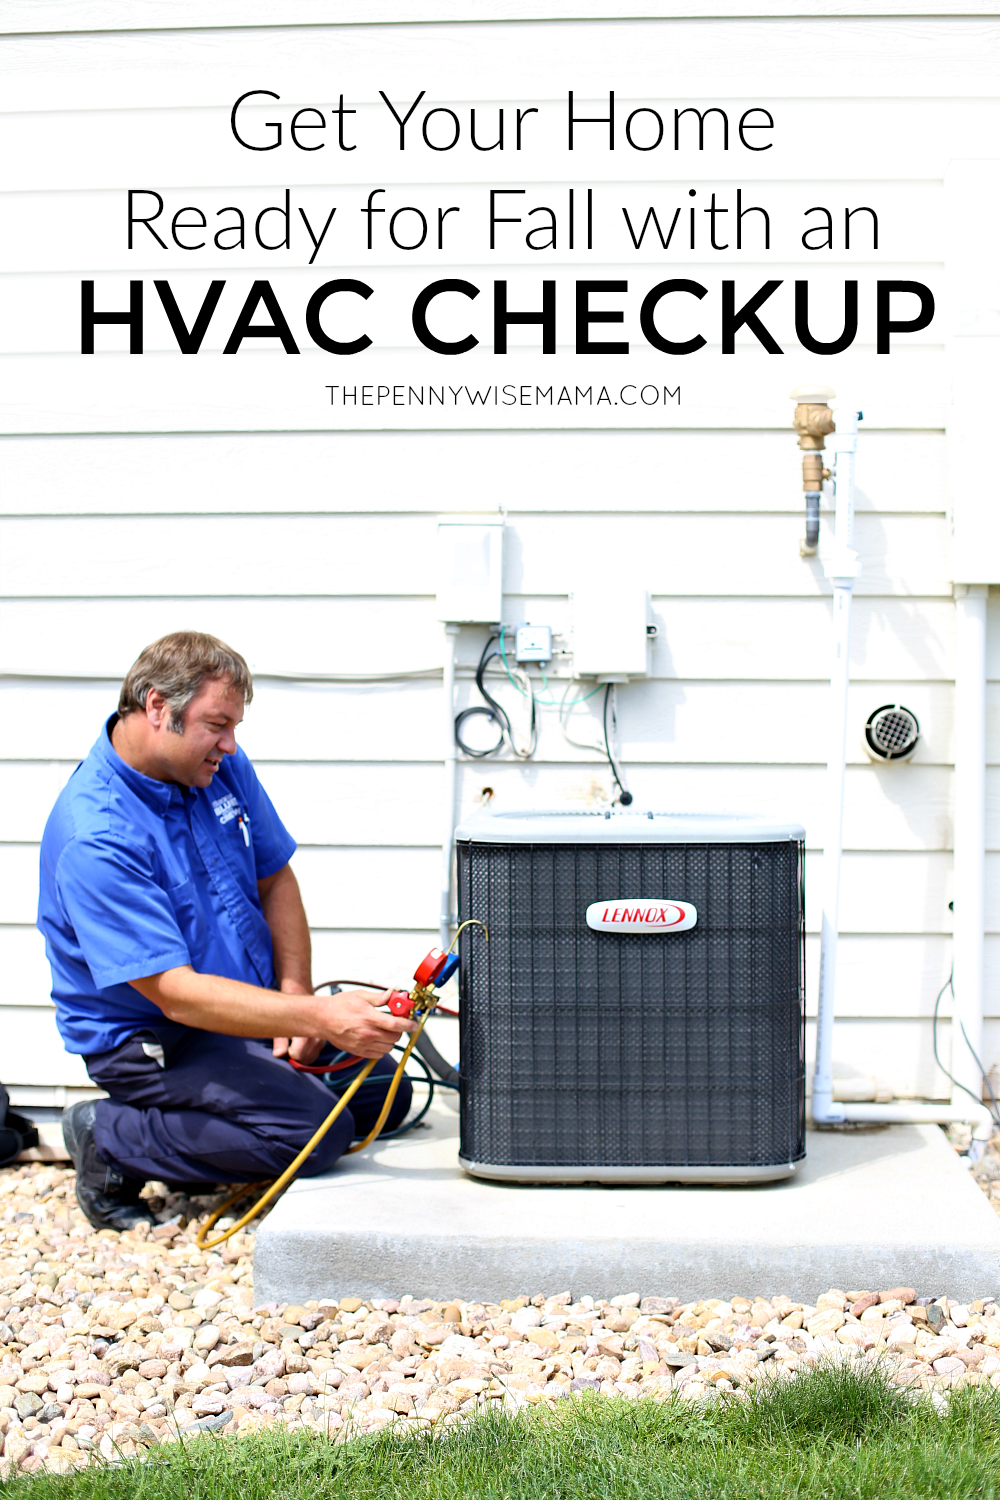 Get your home ready for fall (or any season!) with an HVAC checkup!